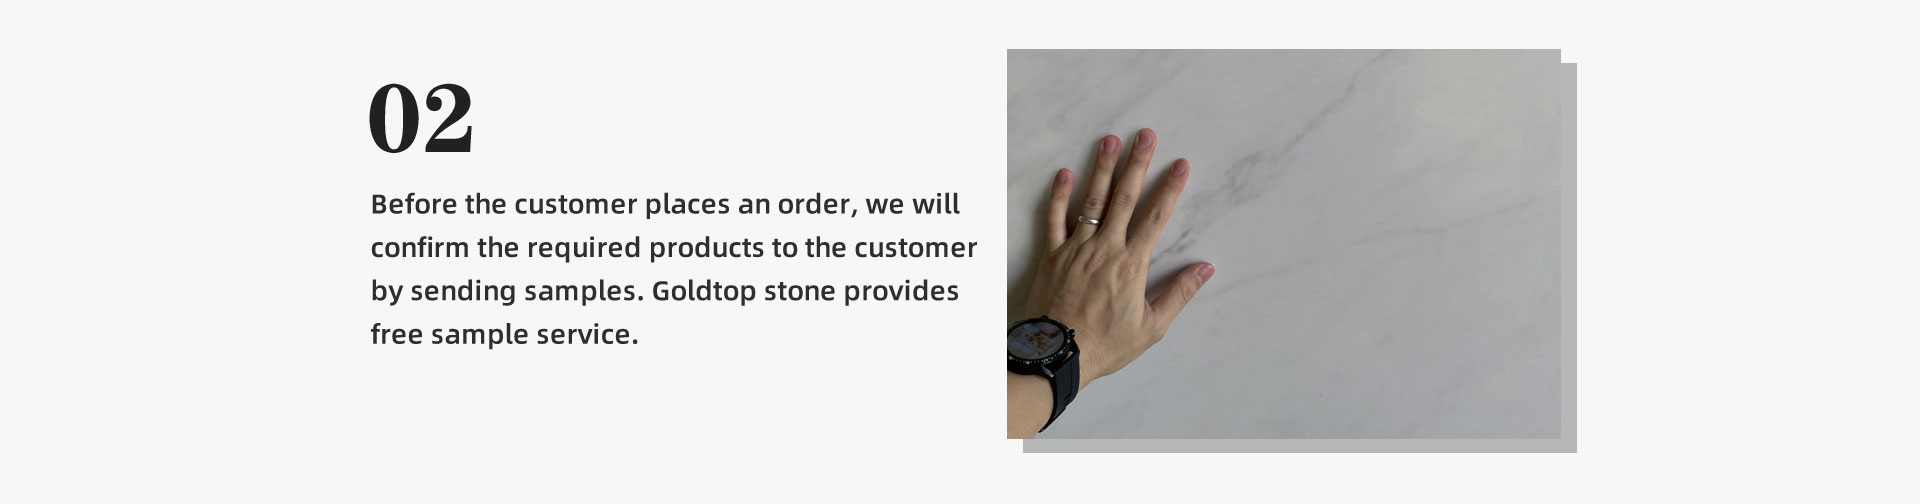 2.Before the customer places an order, we will confirm the required products to the customer by sending samples. Goldtop stone provides free sample service.